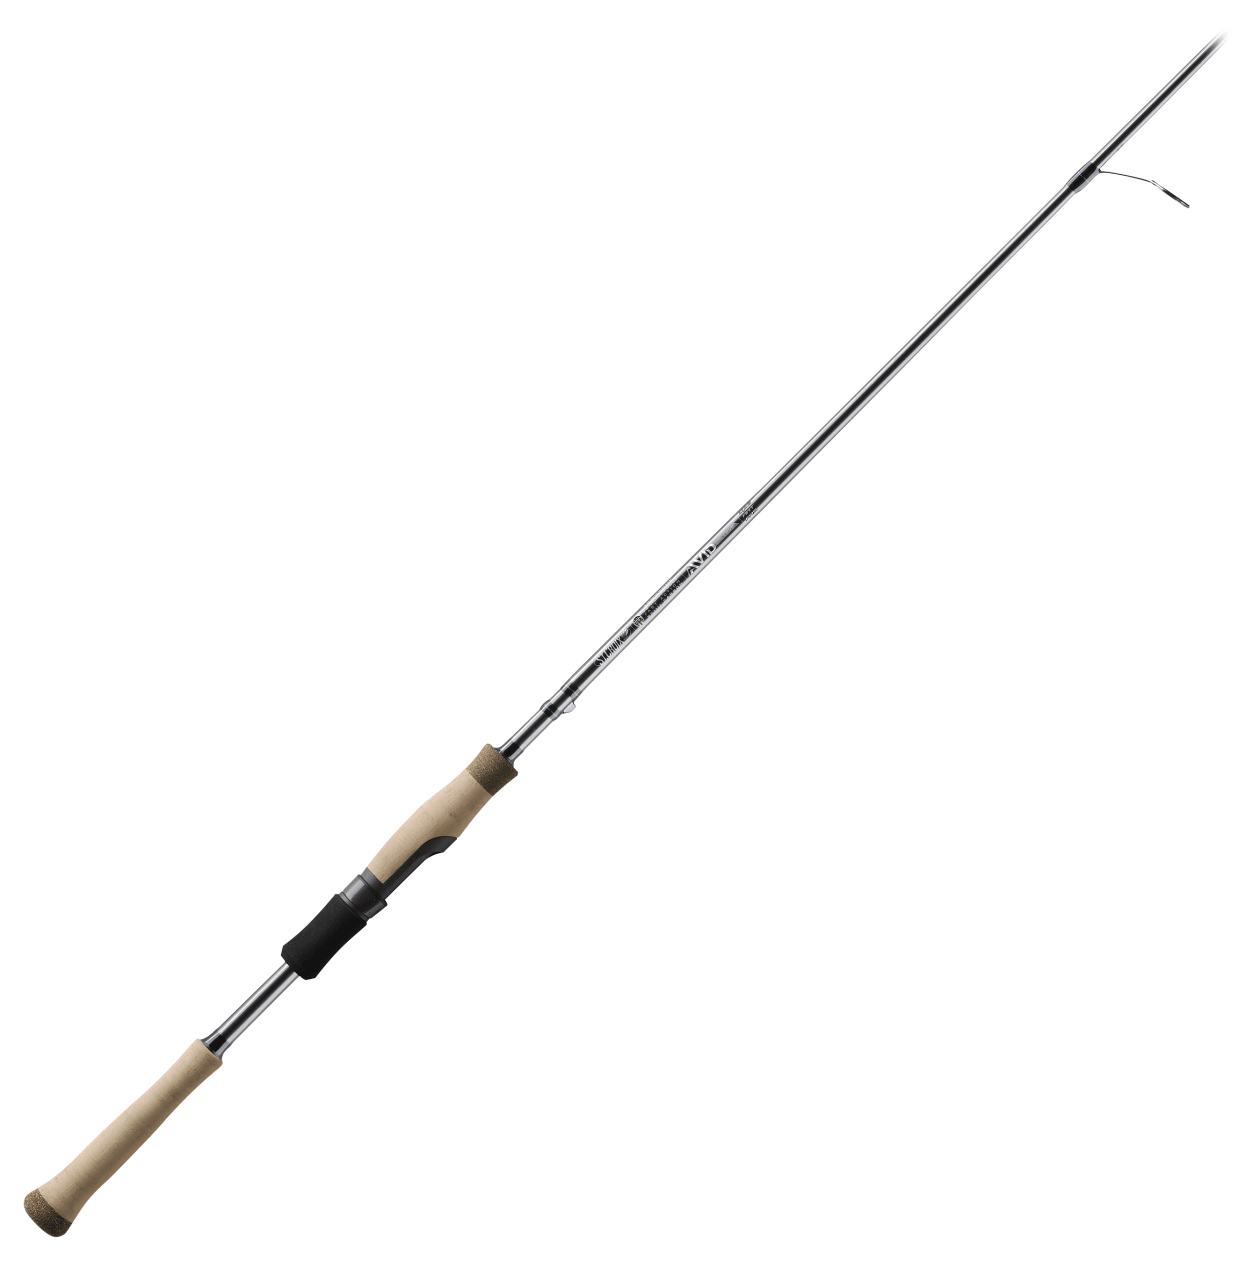 St. Croix Avid Series Walleye Spinning Rod - Hamilton Bait and Tackle